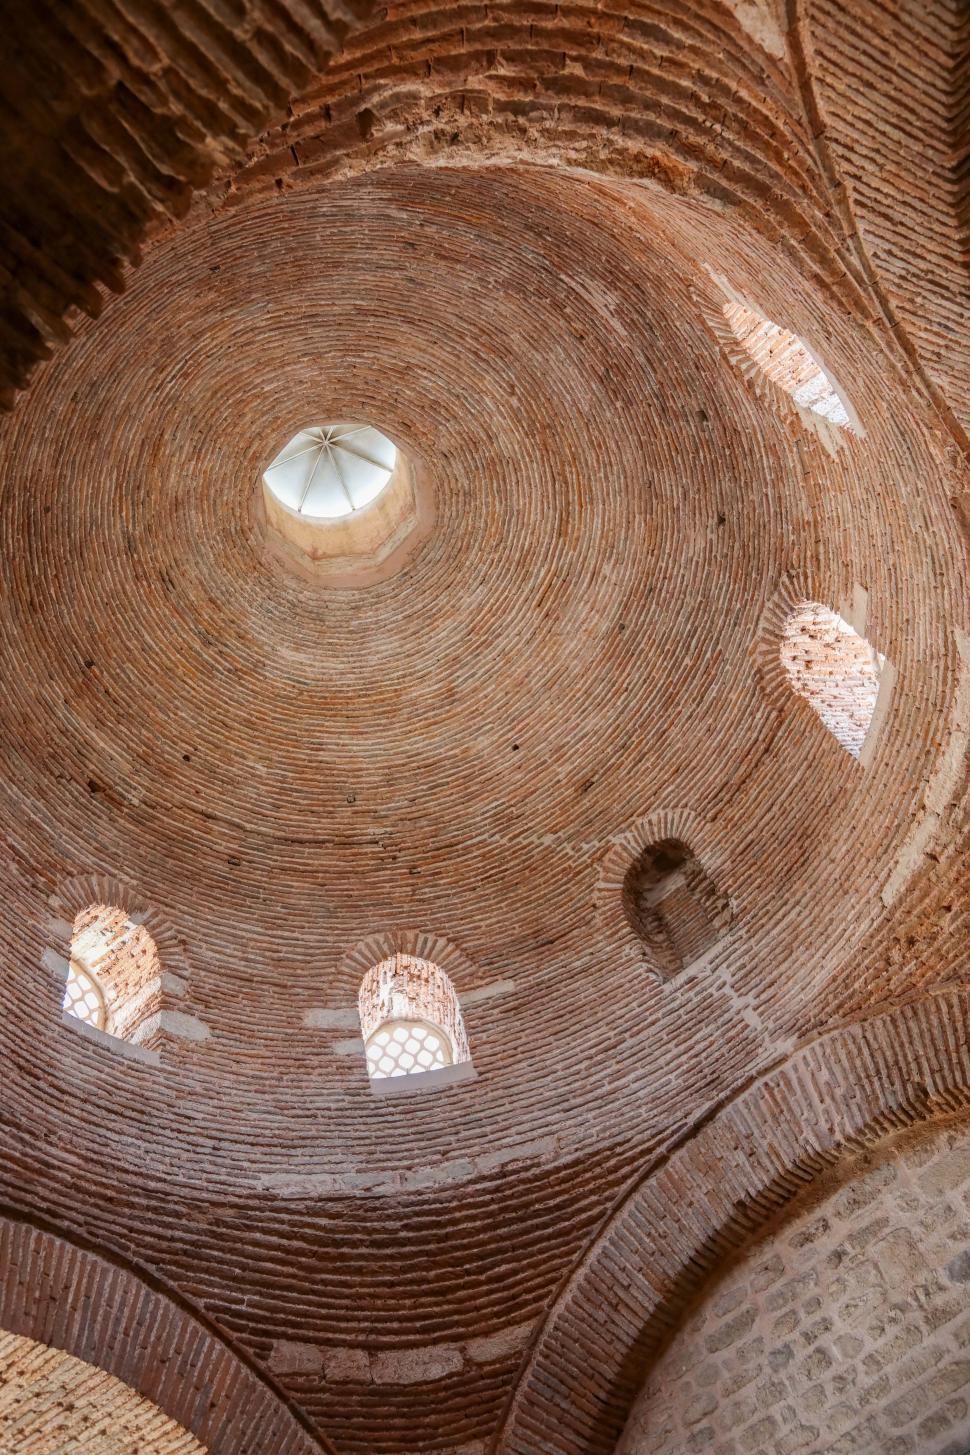 Free Image of Dome interior of historical brick building 